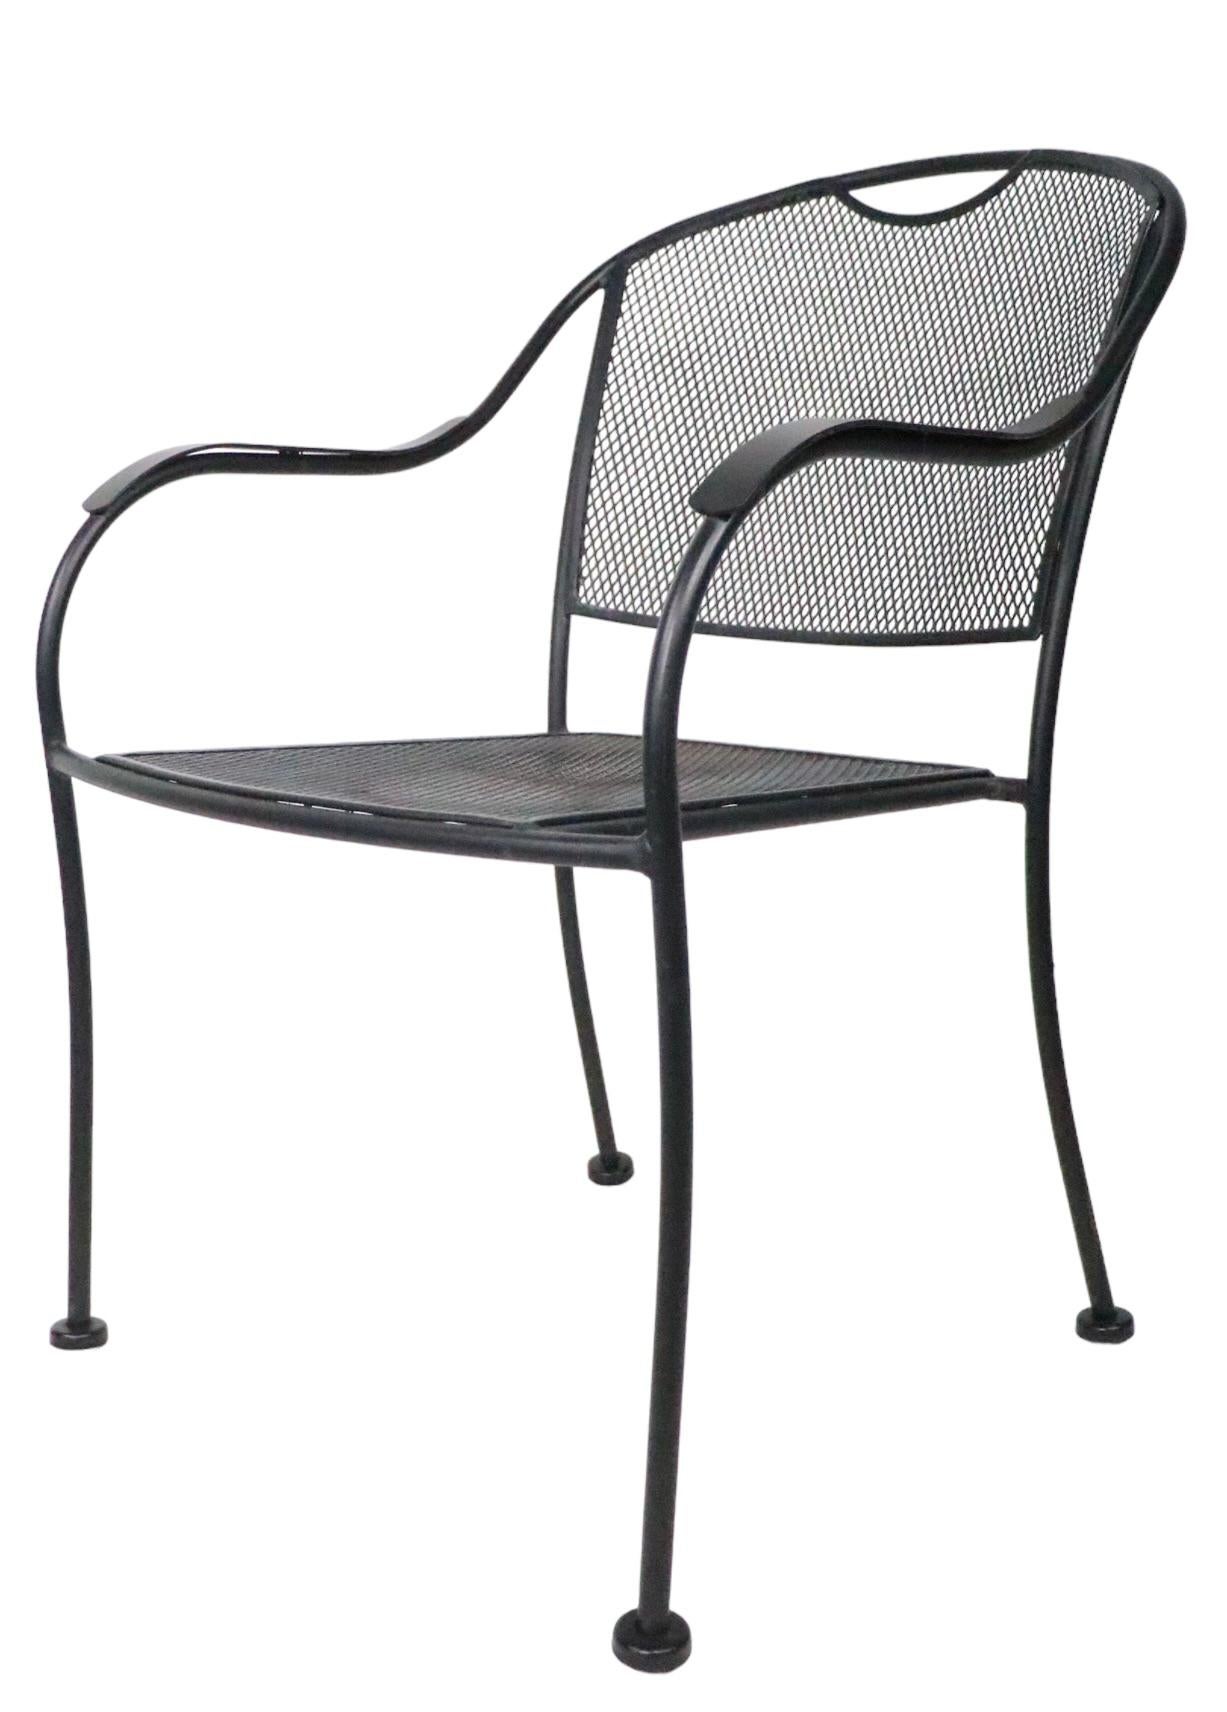 Set of Four Modernist Metal Garden Patio Dining Chairs in the style of Woodard For Sale 1